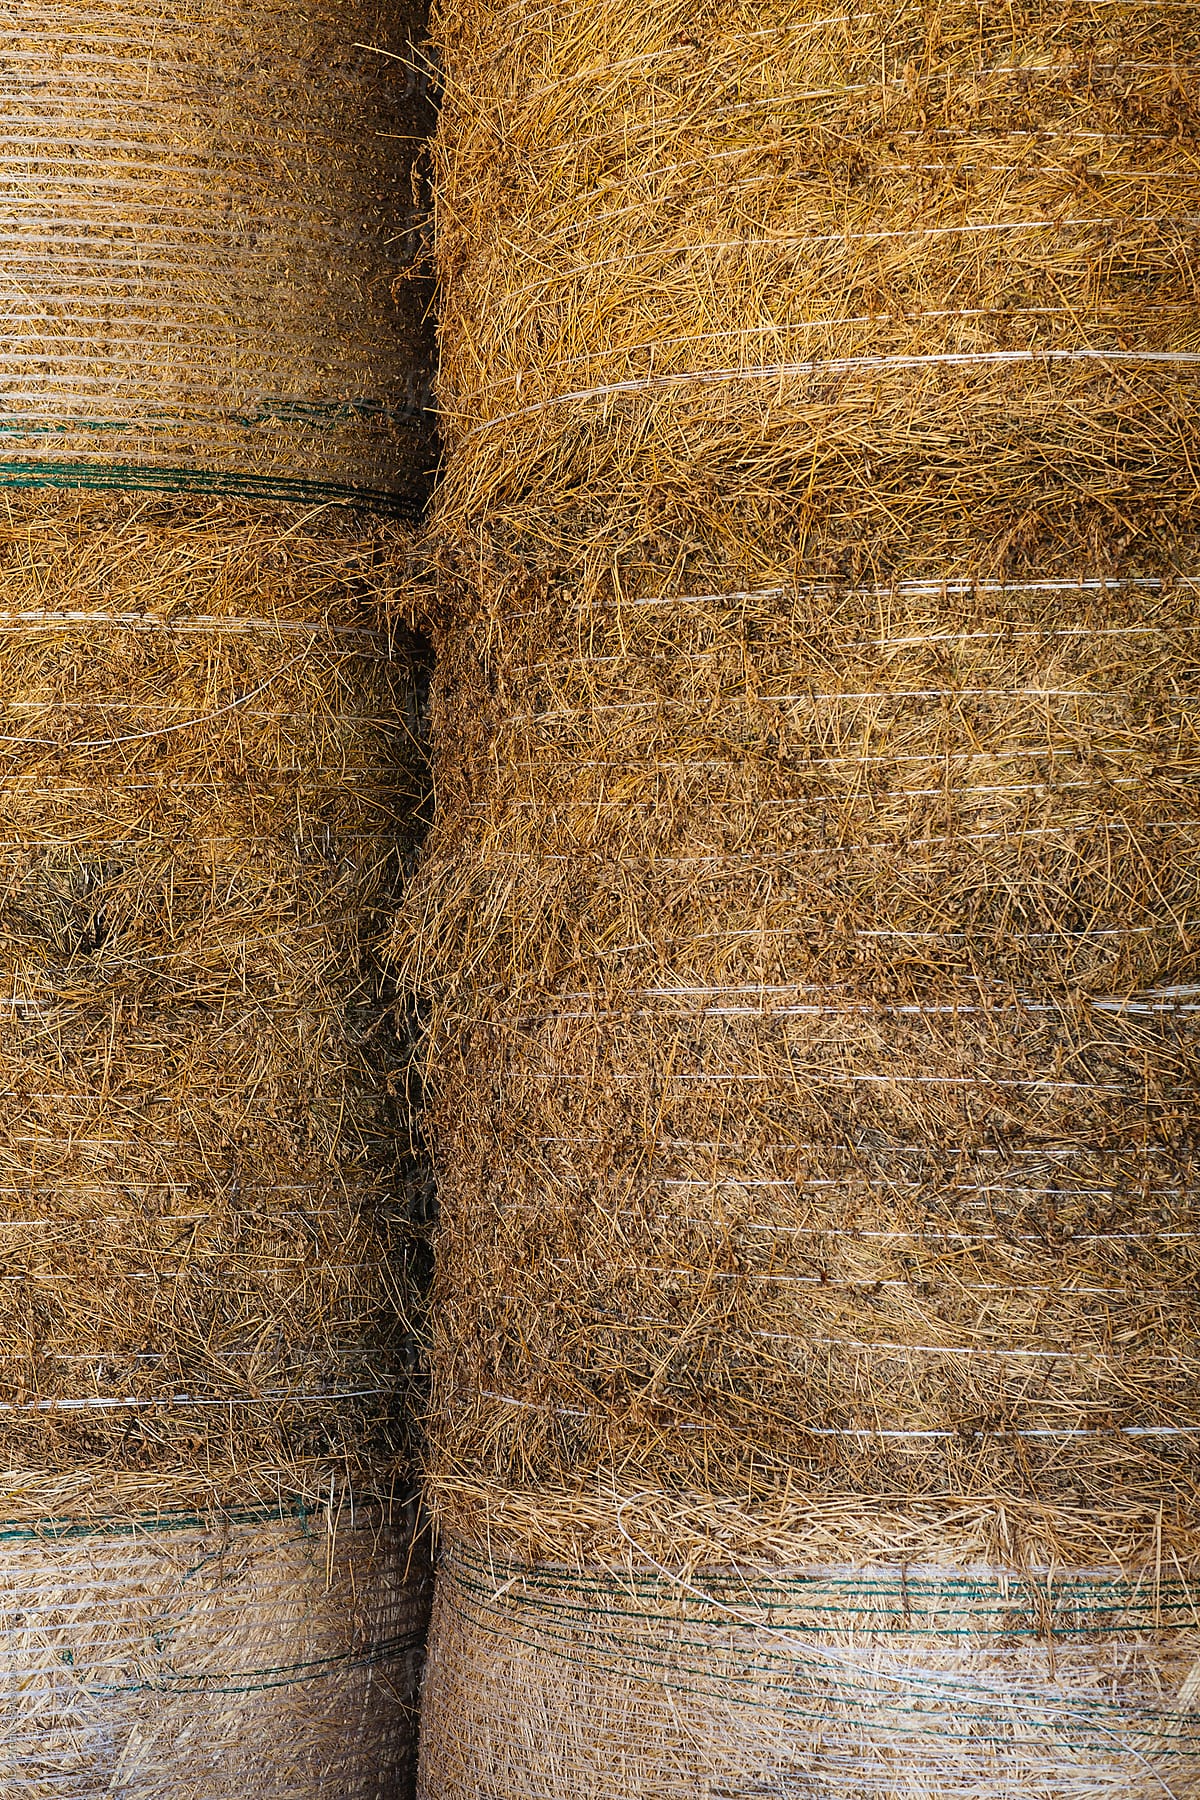 Bale of straw stored for the winter